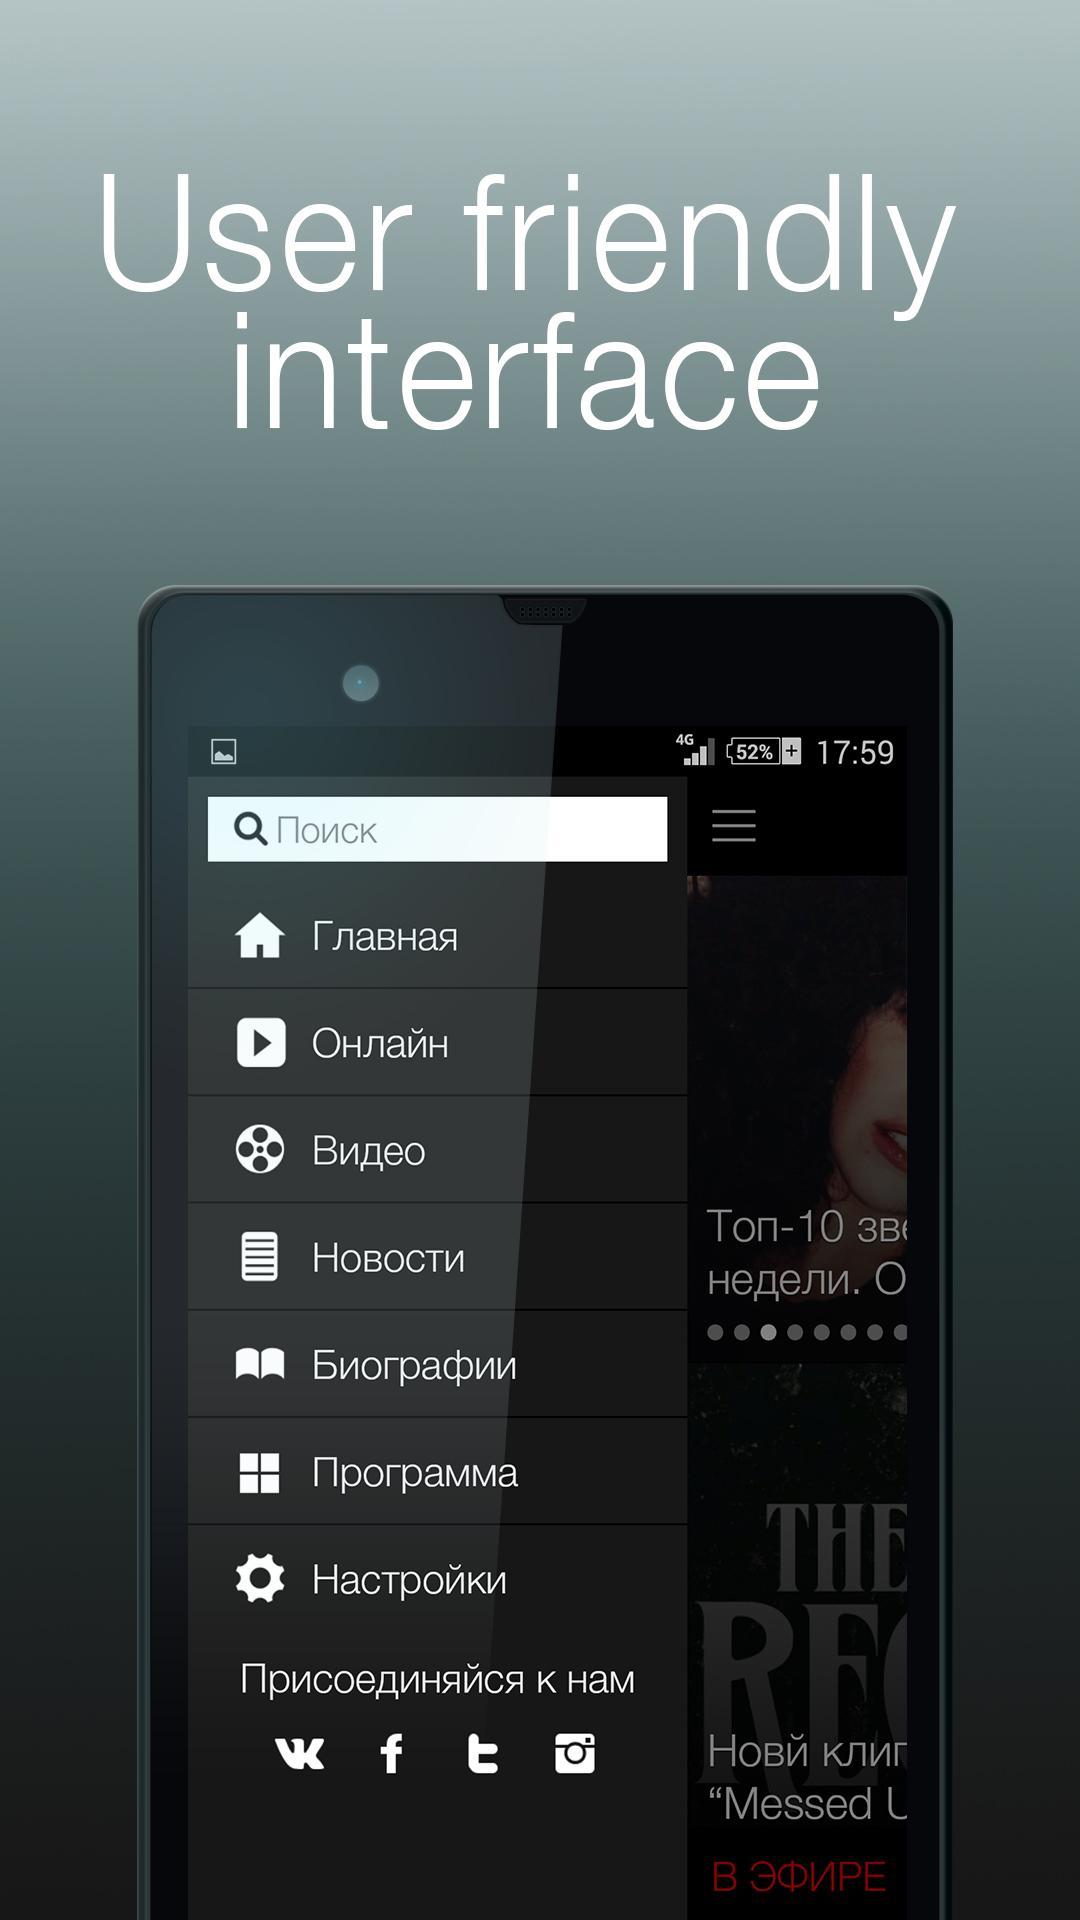 Europa Plus TV for Android - APK Download